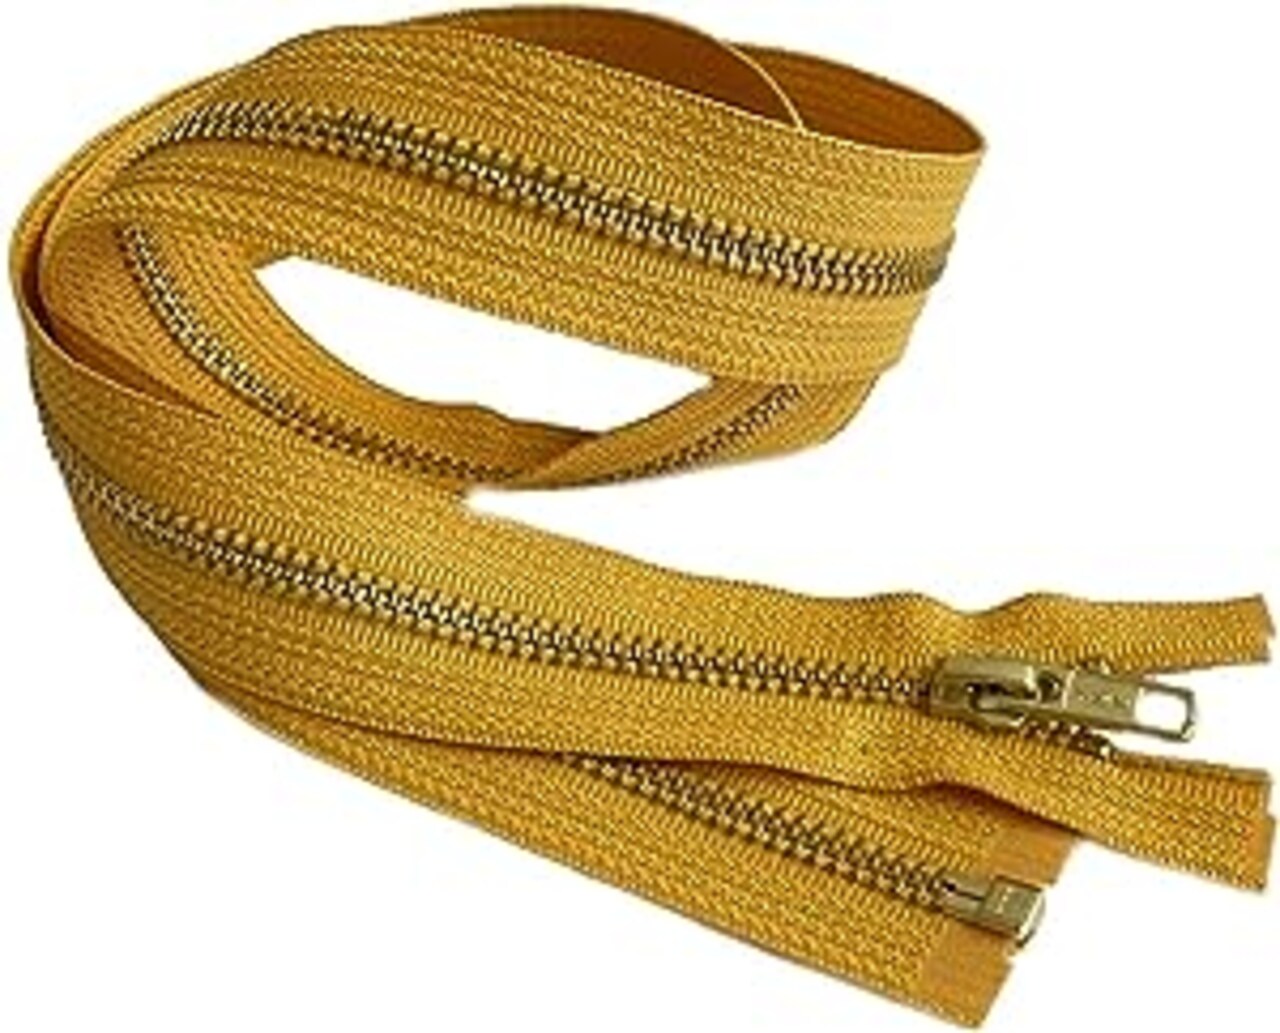 5 Brass YKK Medium Weight Jacket Separating Zipper - Choose Your Length -  Color: Topaz Gold #846 - Made in The United States (1 Zipper Per Pack) (12  Inches)